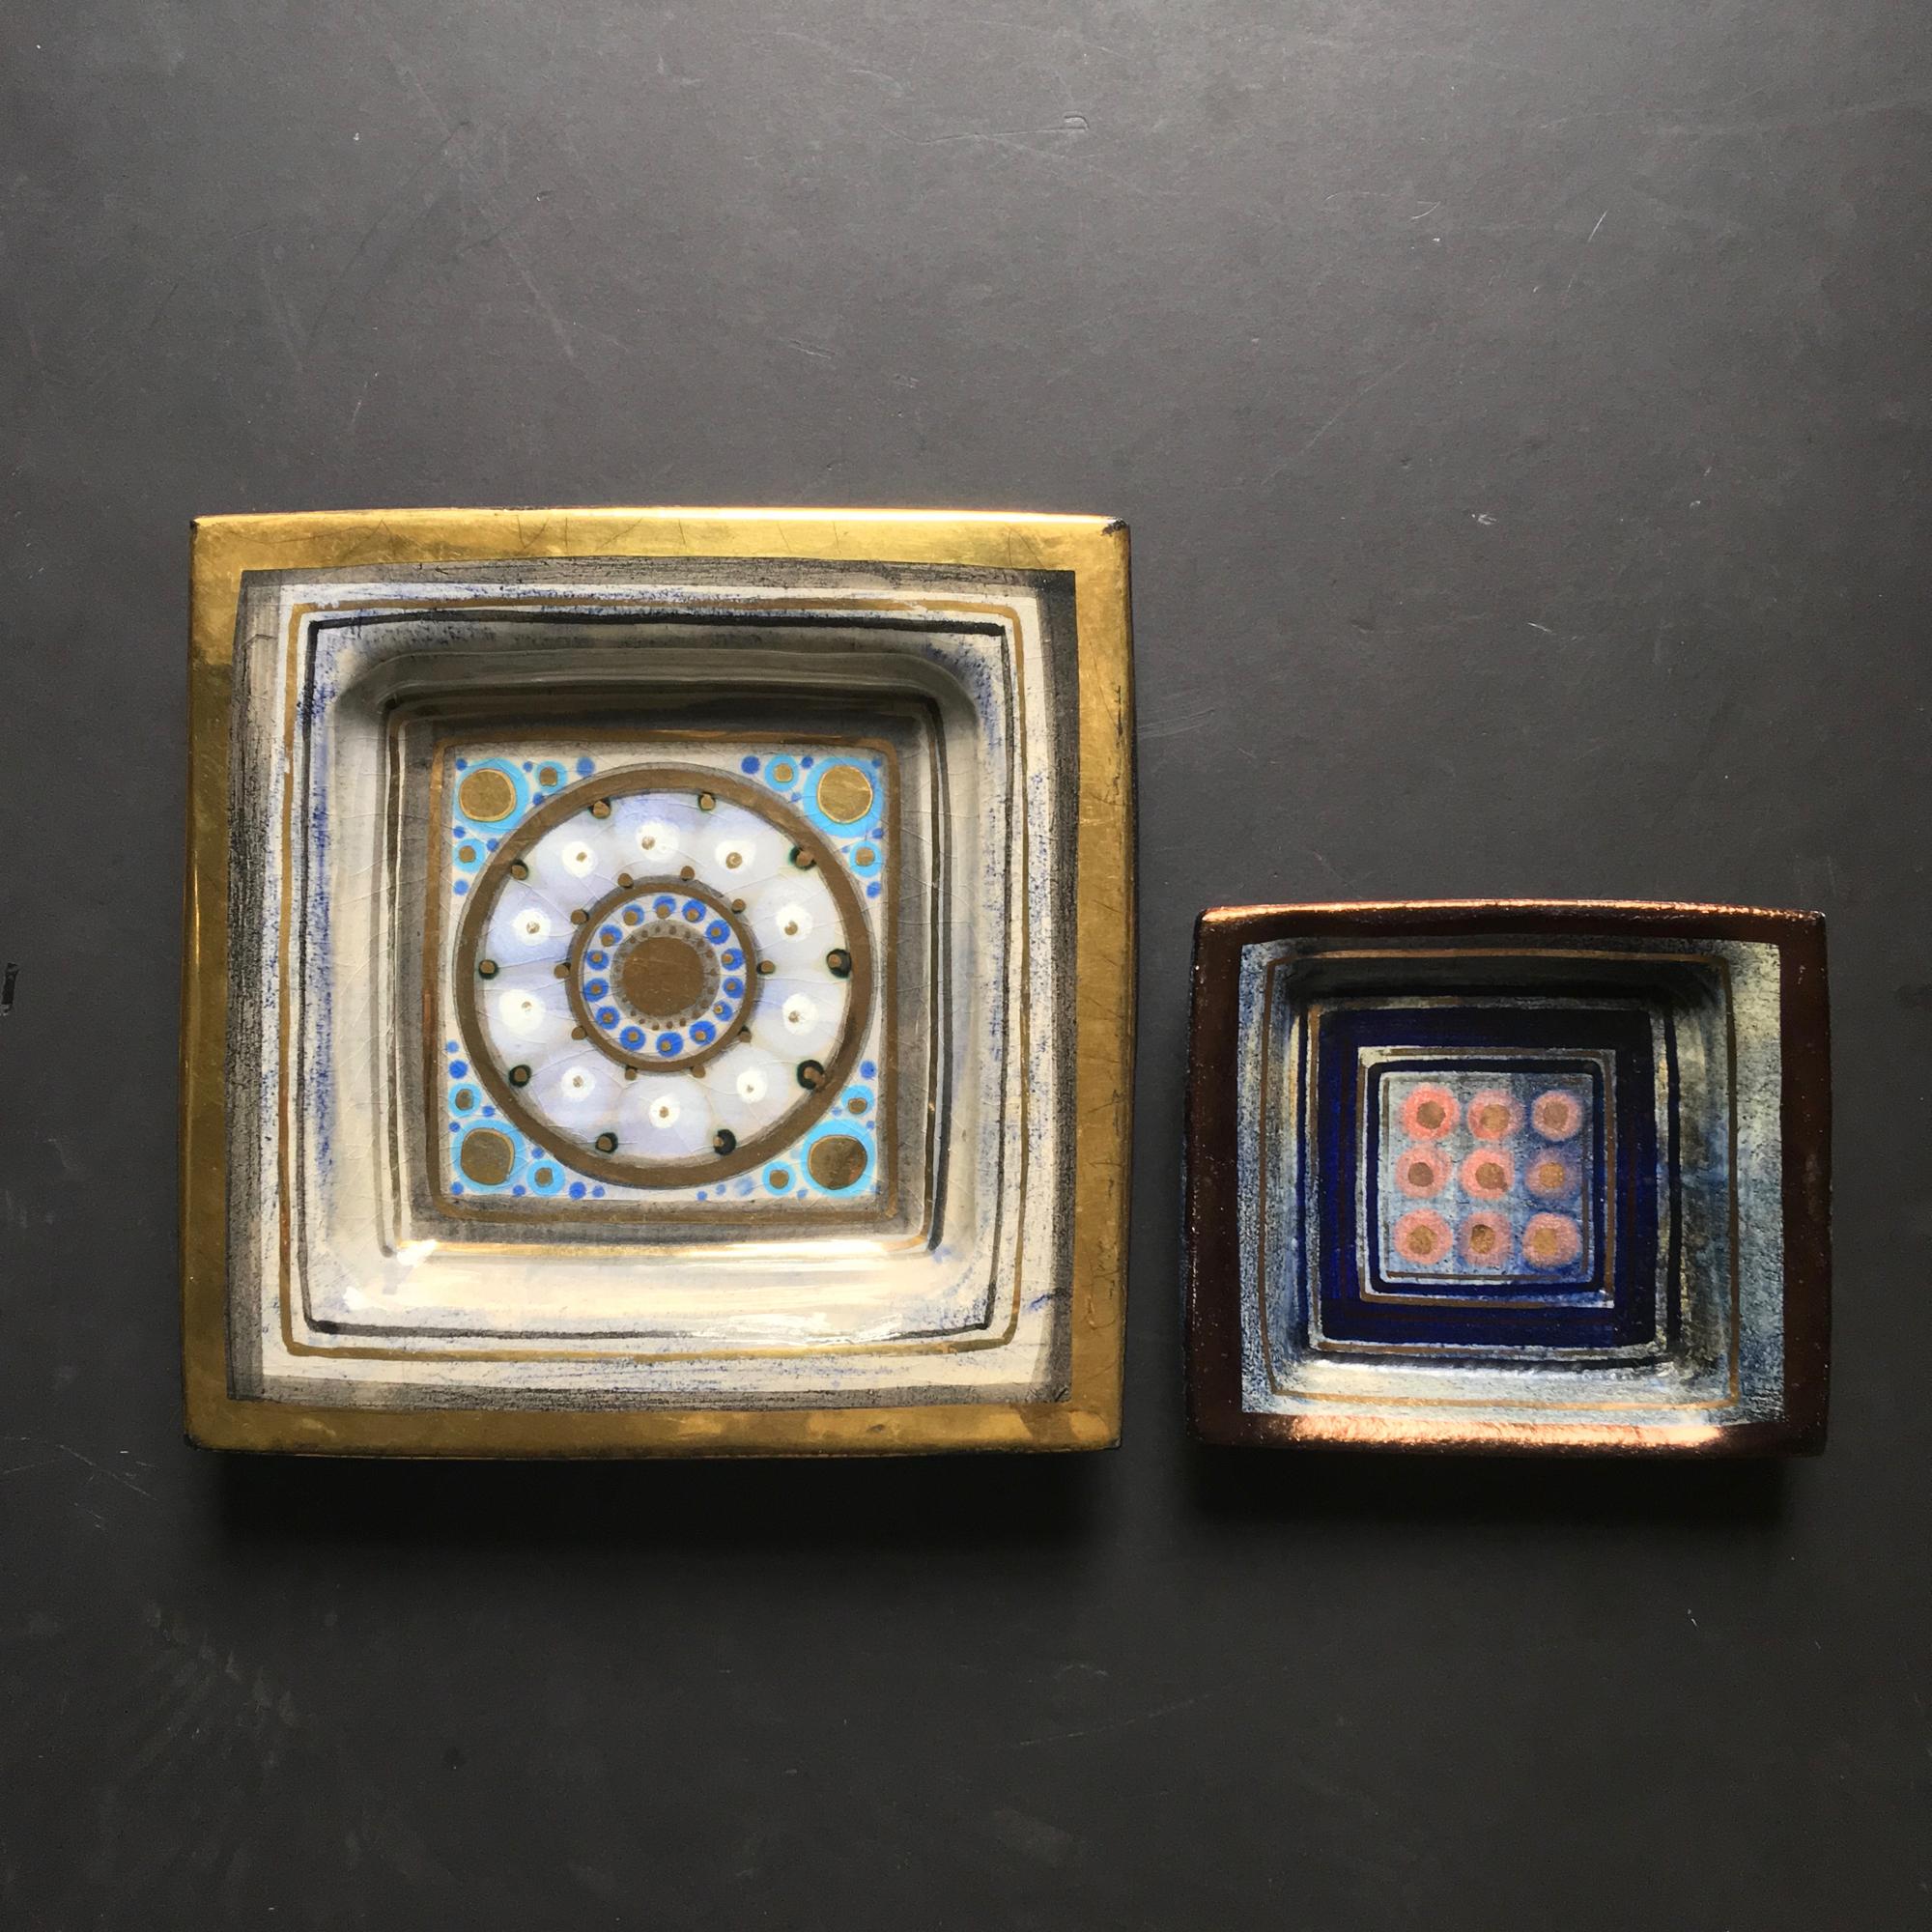 Two decorative ceramic plates or vide-poches by ceramicist Georges Pelletier, France 1960s.

Both pieces are hand-made ceramic, with attractive designs in shades of blue. The larger plate is of delicate tones of pale blue and grey with rich gold